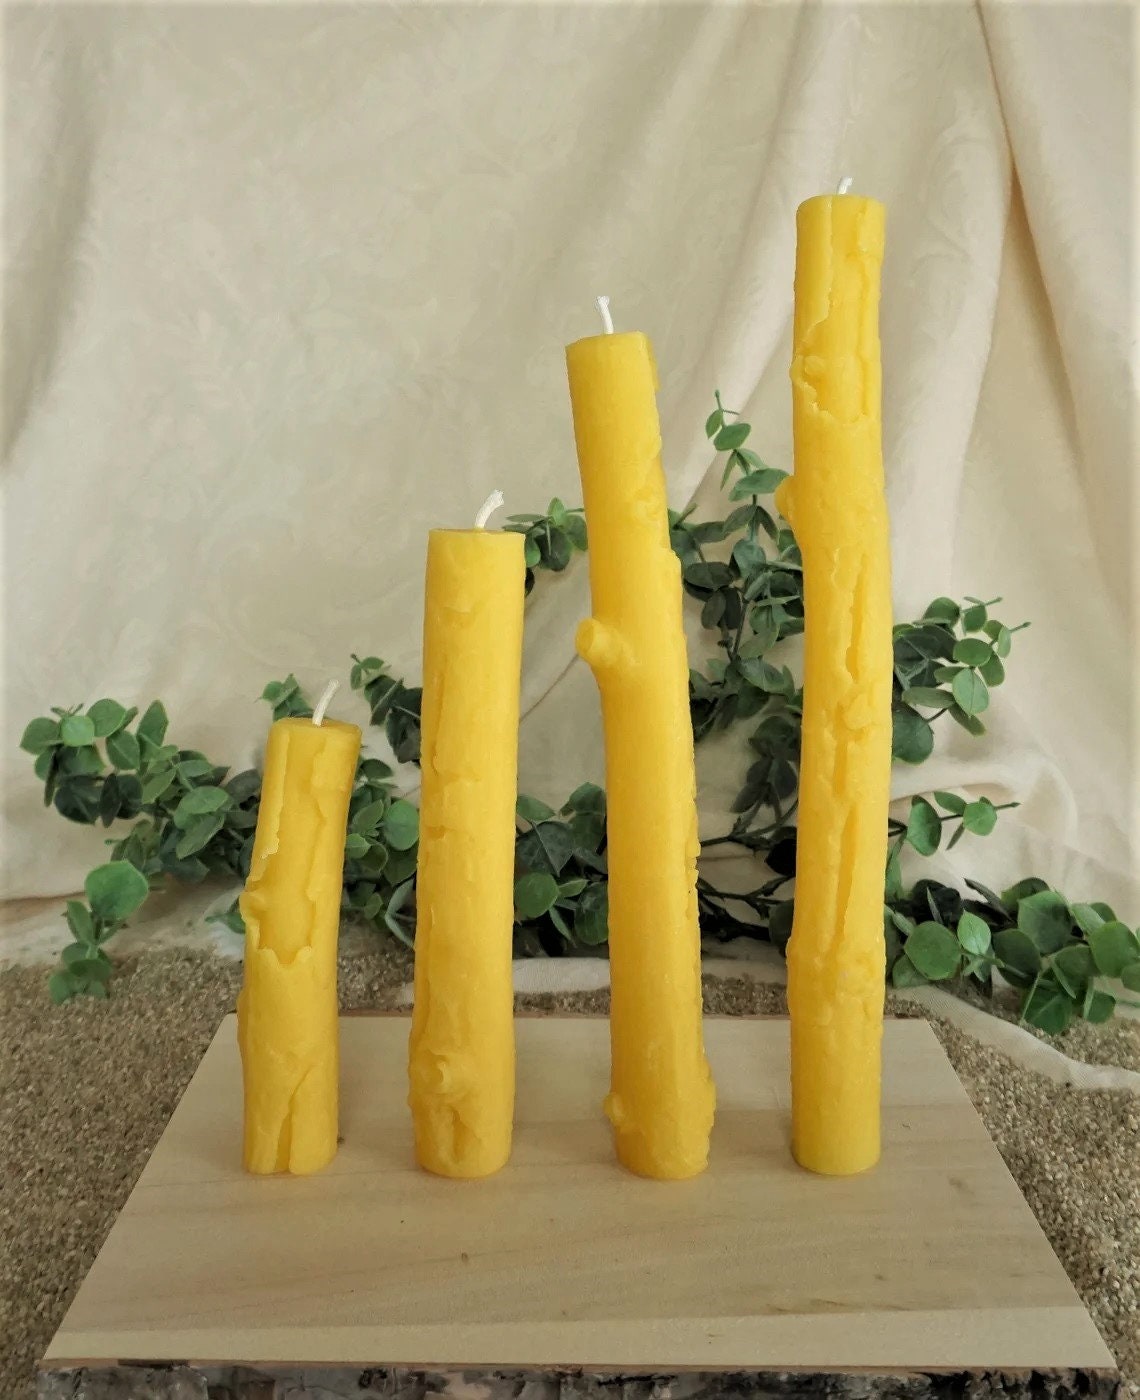 100% BEESWAX 1-1/4 x 19-1/2 CANDLE STICK (Box of 6)